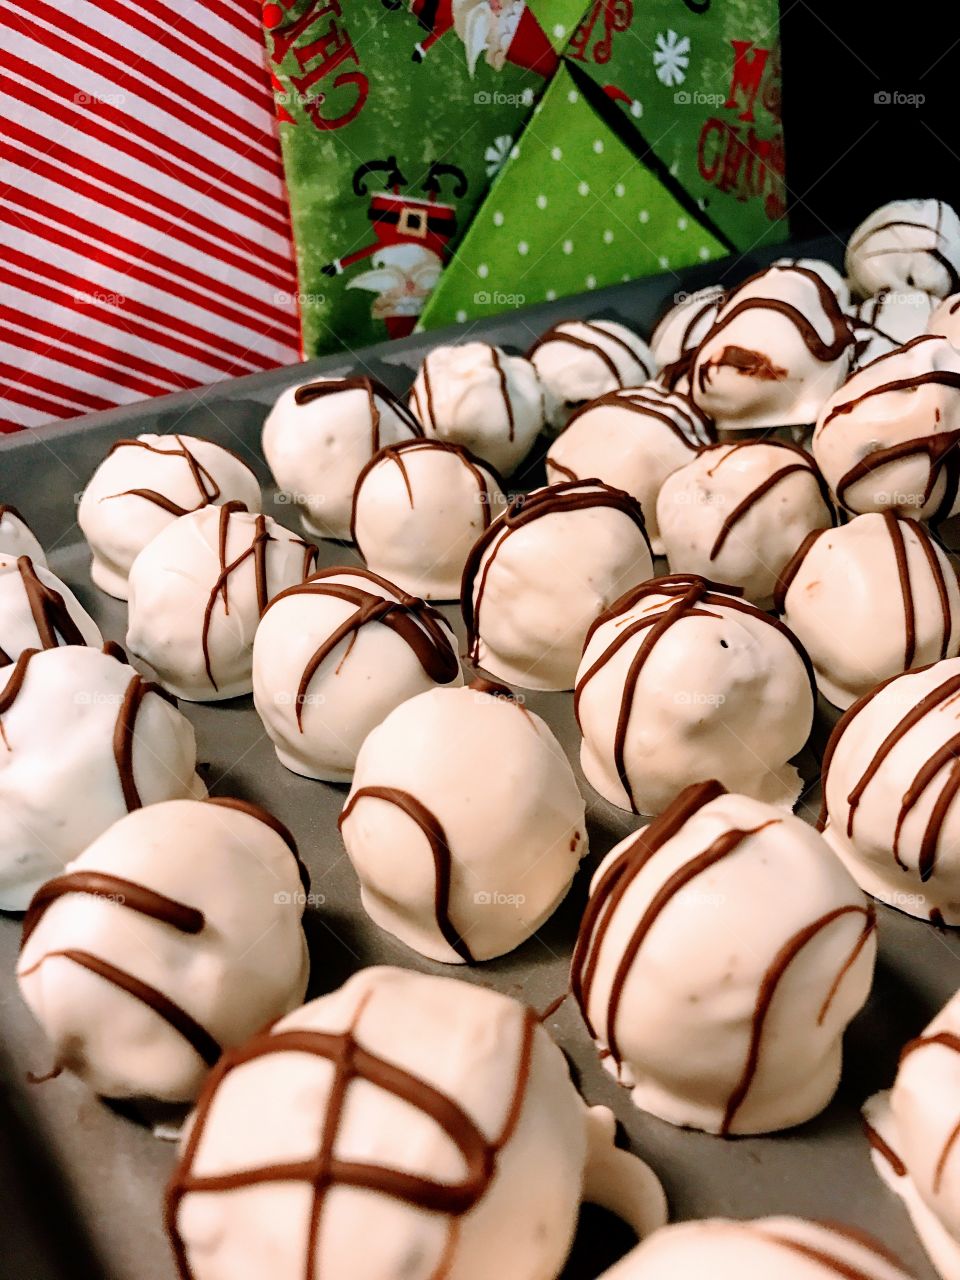 Cookie balls with icing and frosting. YUM!